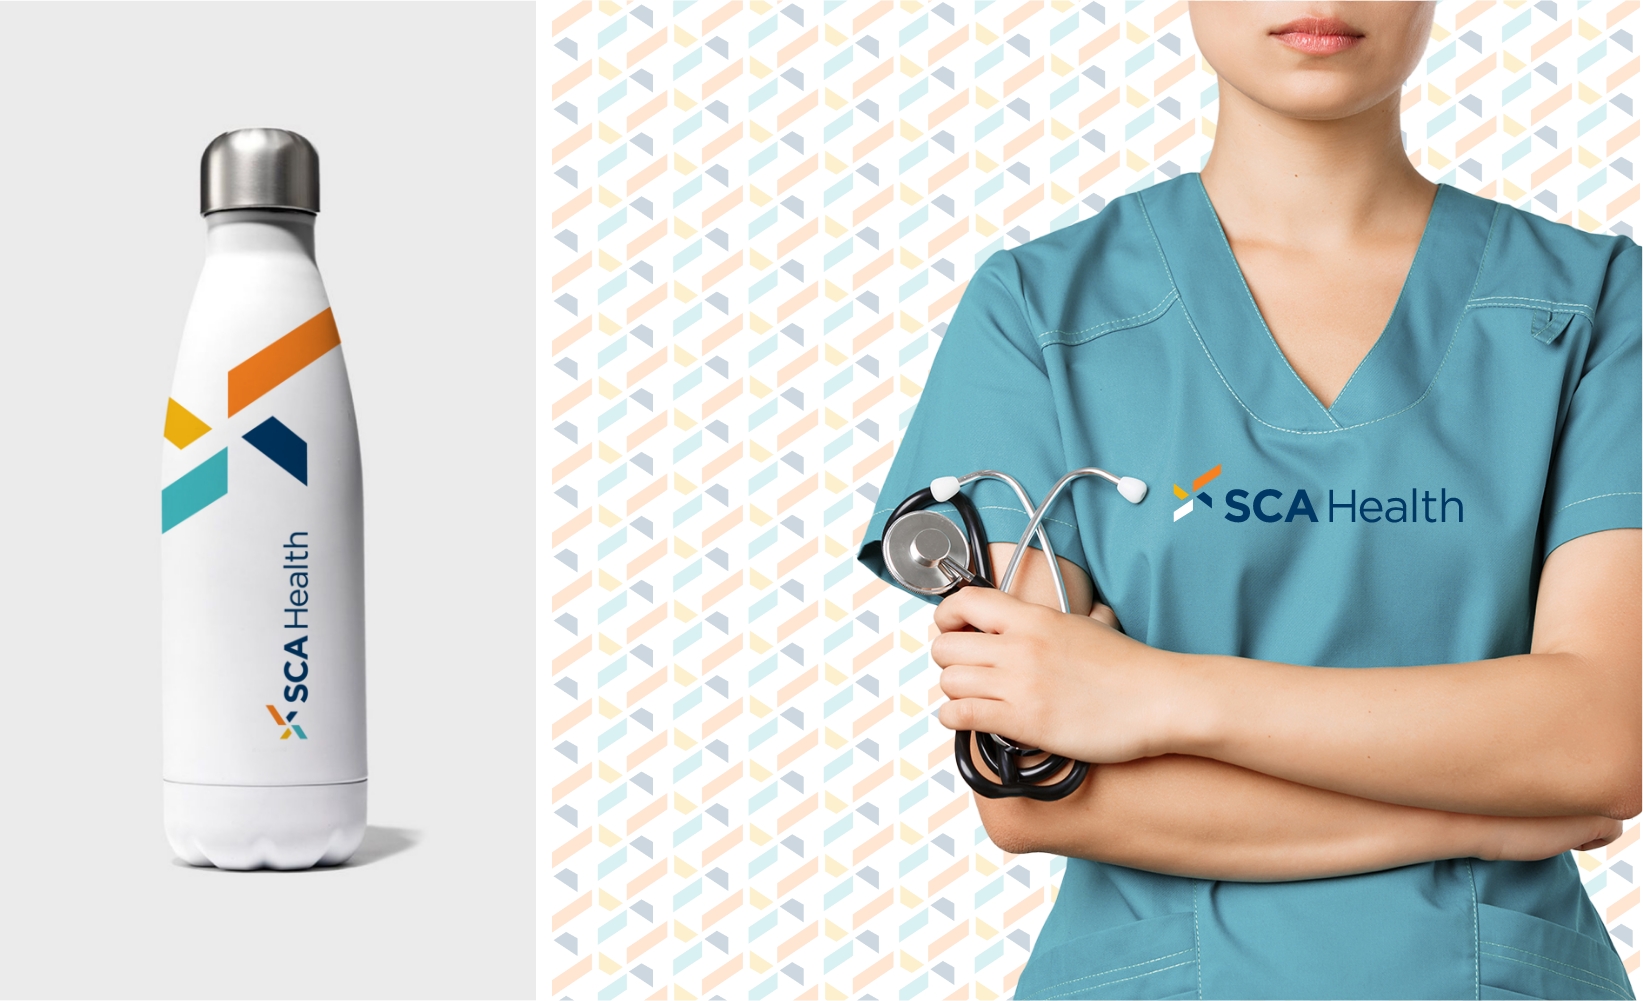 (Left) Photo of white, metal water bottle boasting the SCA Health logo and iconography on it. (Right) Woman doctor holding a stethoscope wearing a comfy-looking SCA Health doctor's tee-shirt.